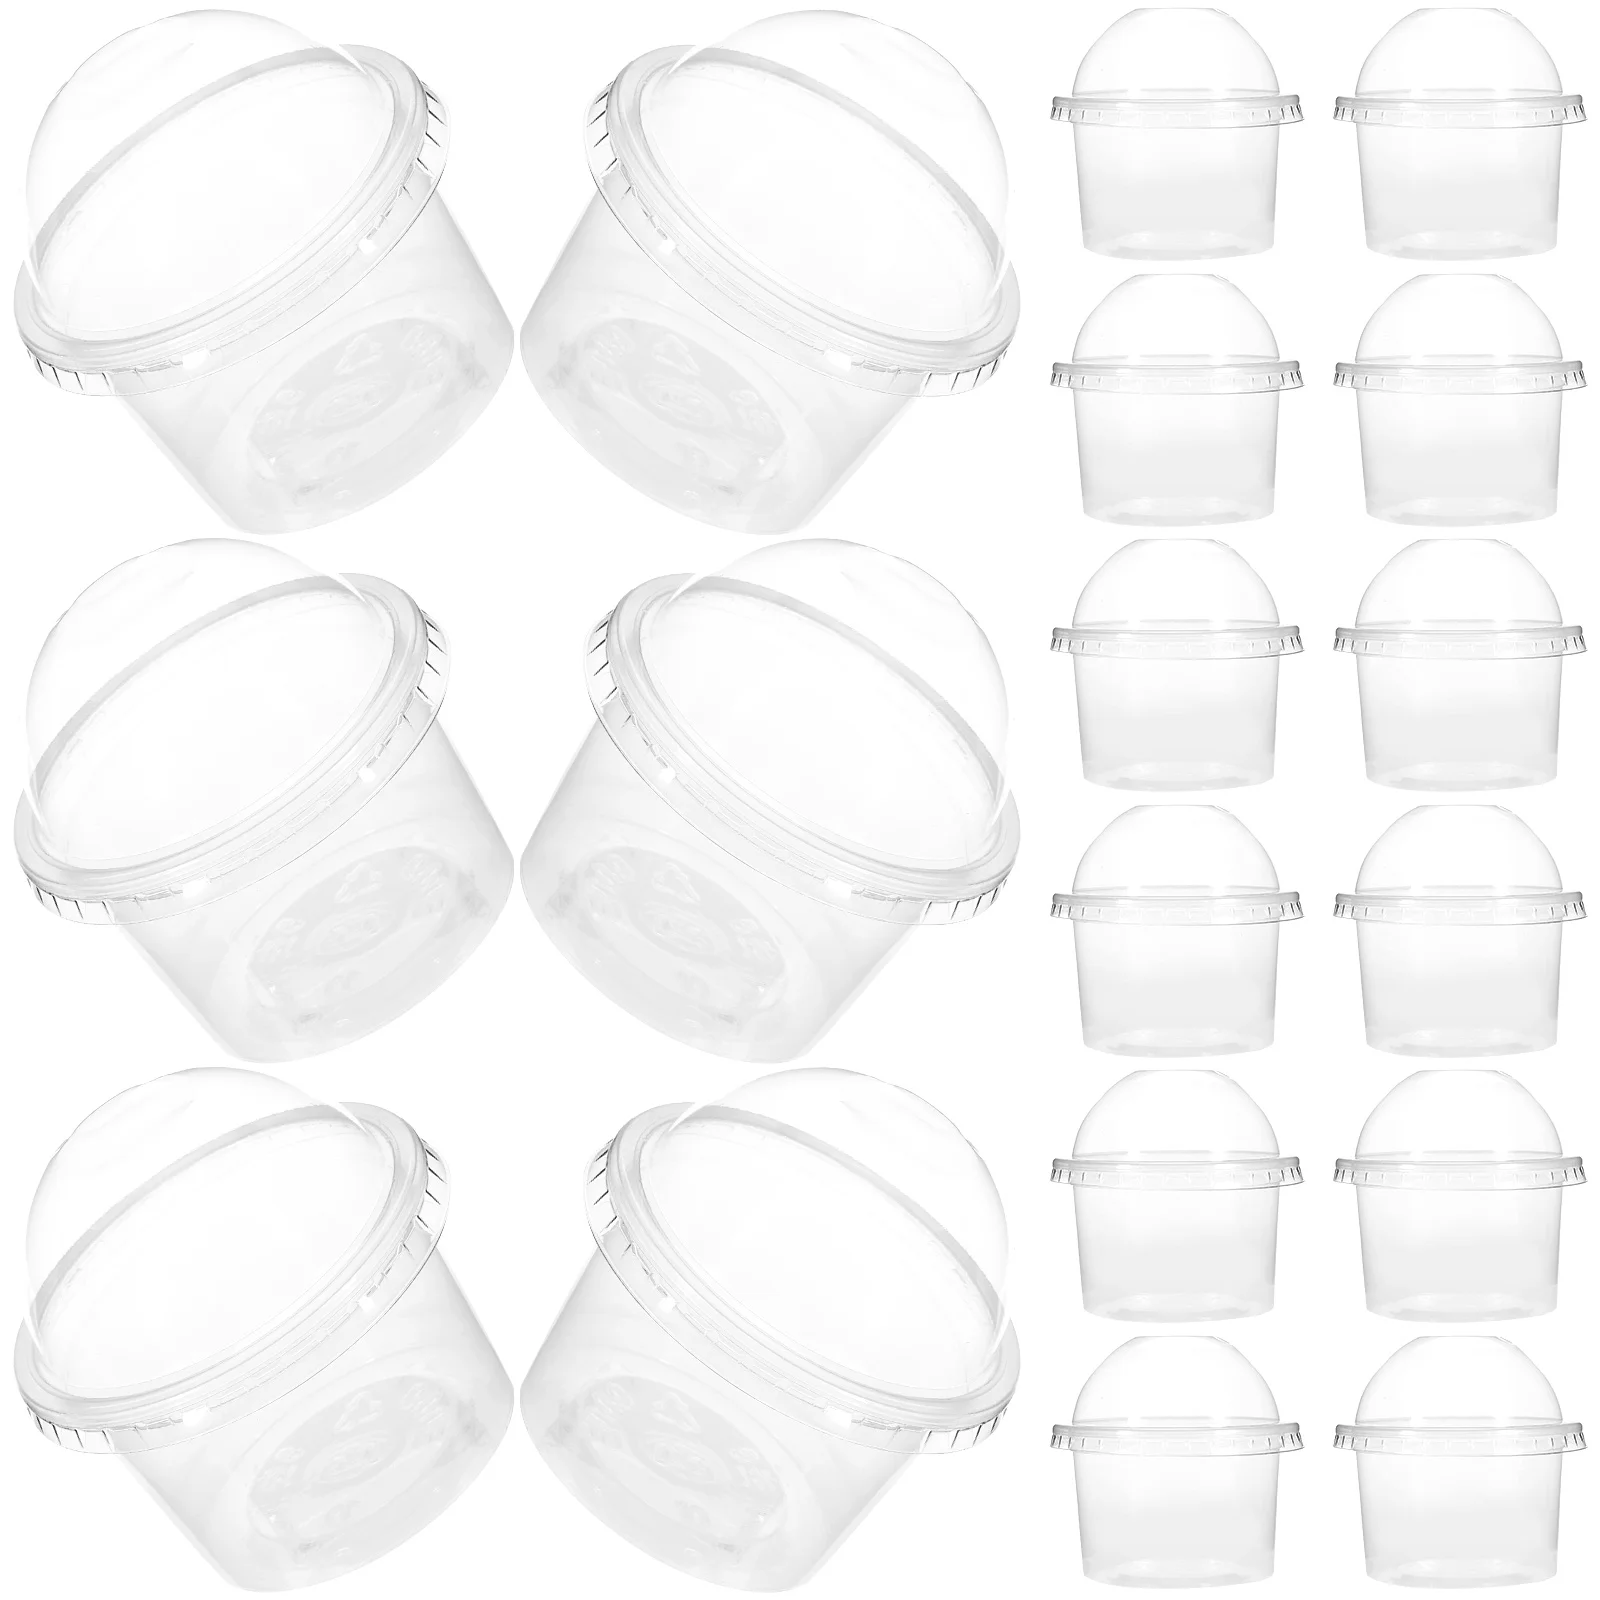 

100pcs Disposable Pudding Cups Disposable Plastic Dessert Bowls Takeout Food Container Treat Cups